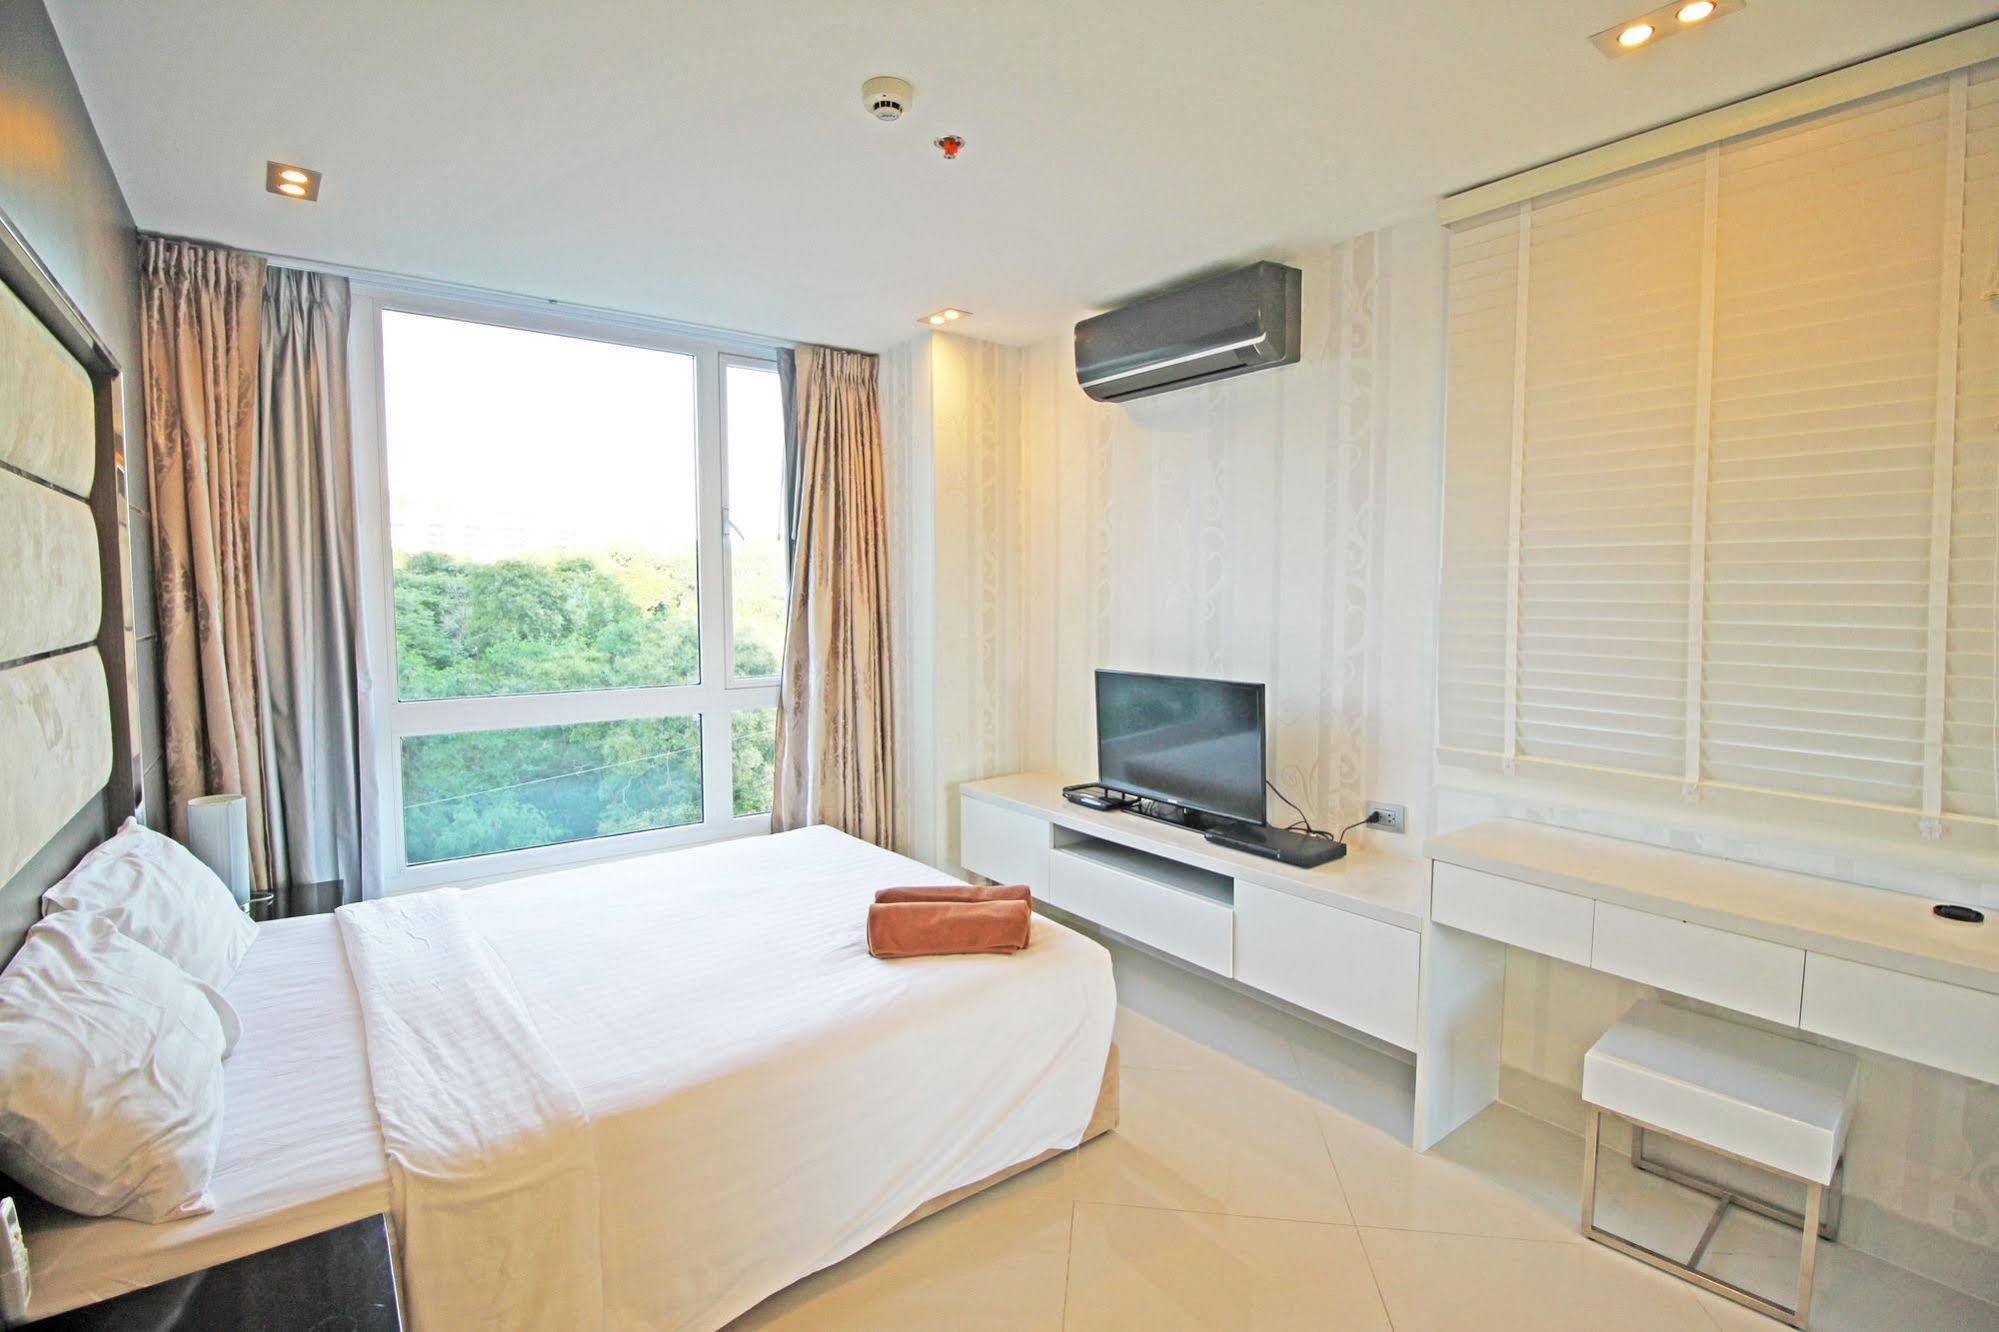 The View Cosy Beach By Pattaya Sunny Rentals Bagian luar foto